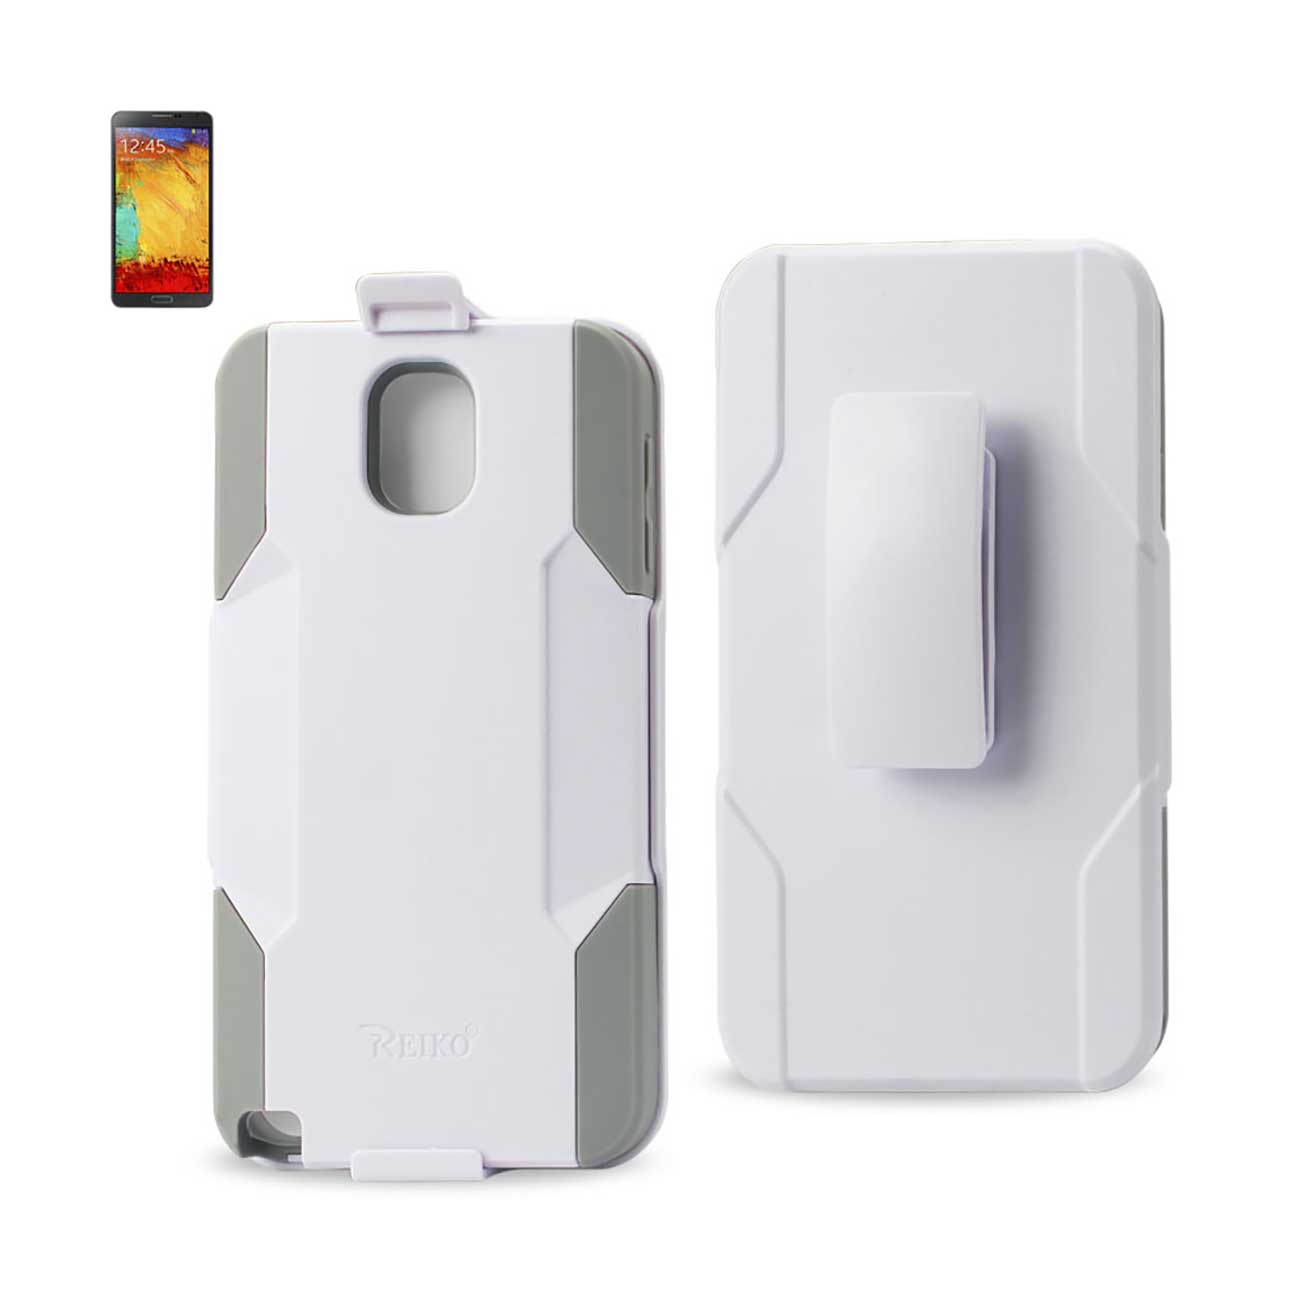 Samsung Galaxy Note 3 3-In-1 Hybrid Heavy Duty Holster Combo Case In Gray White